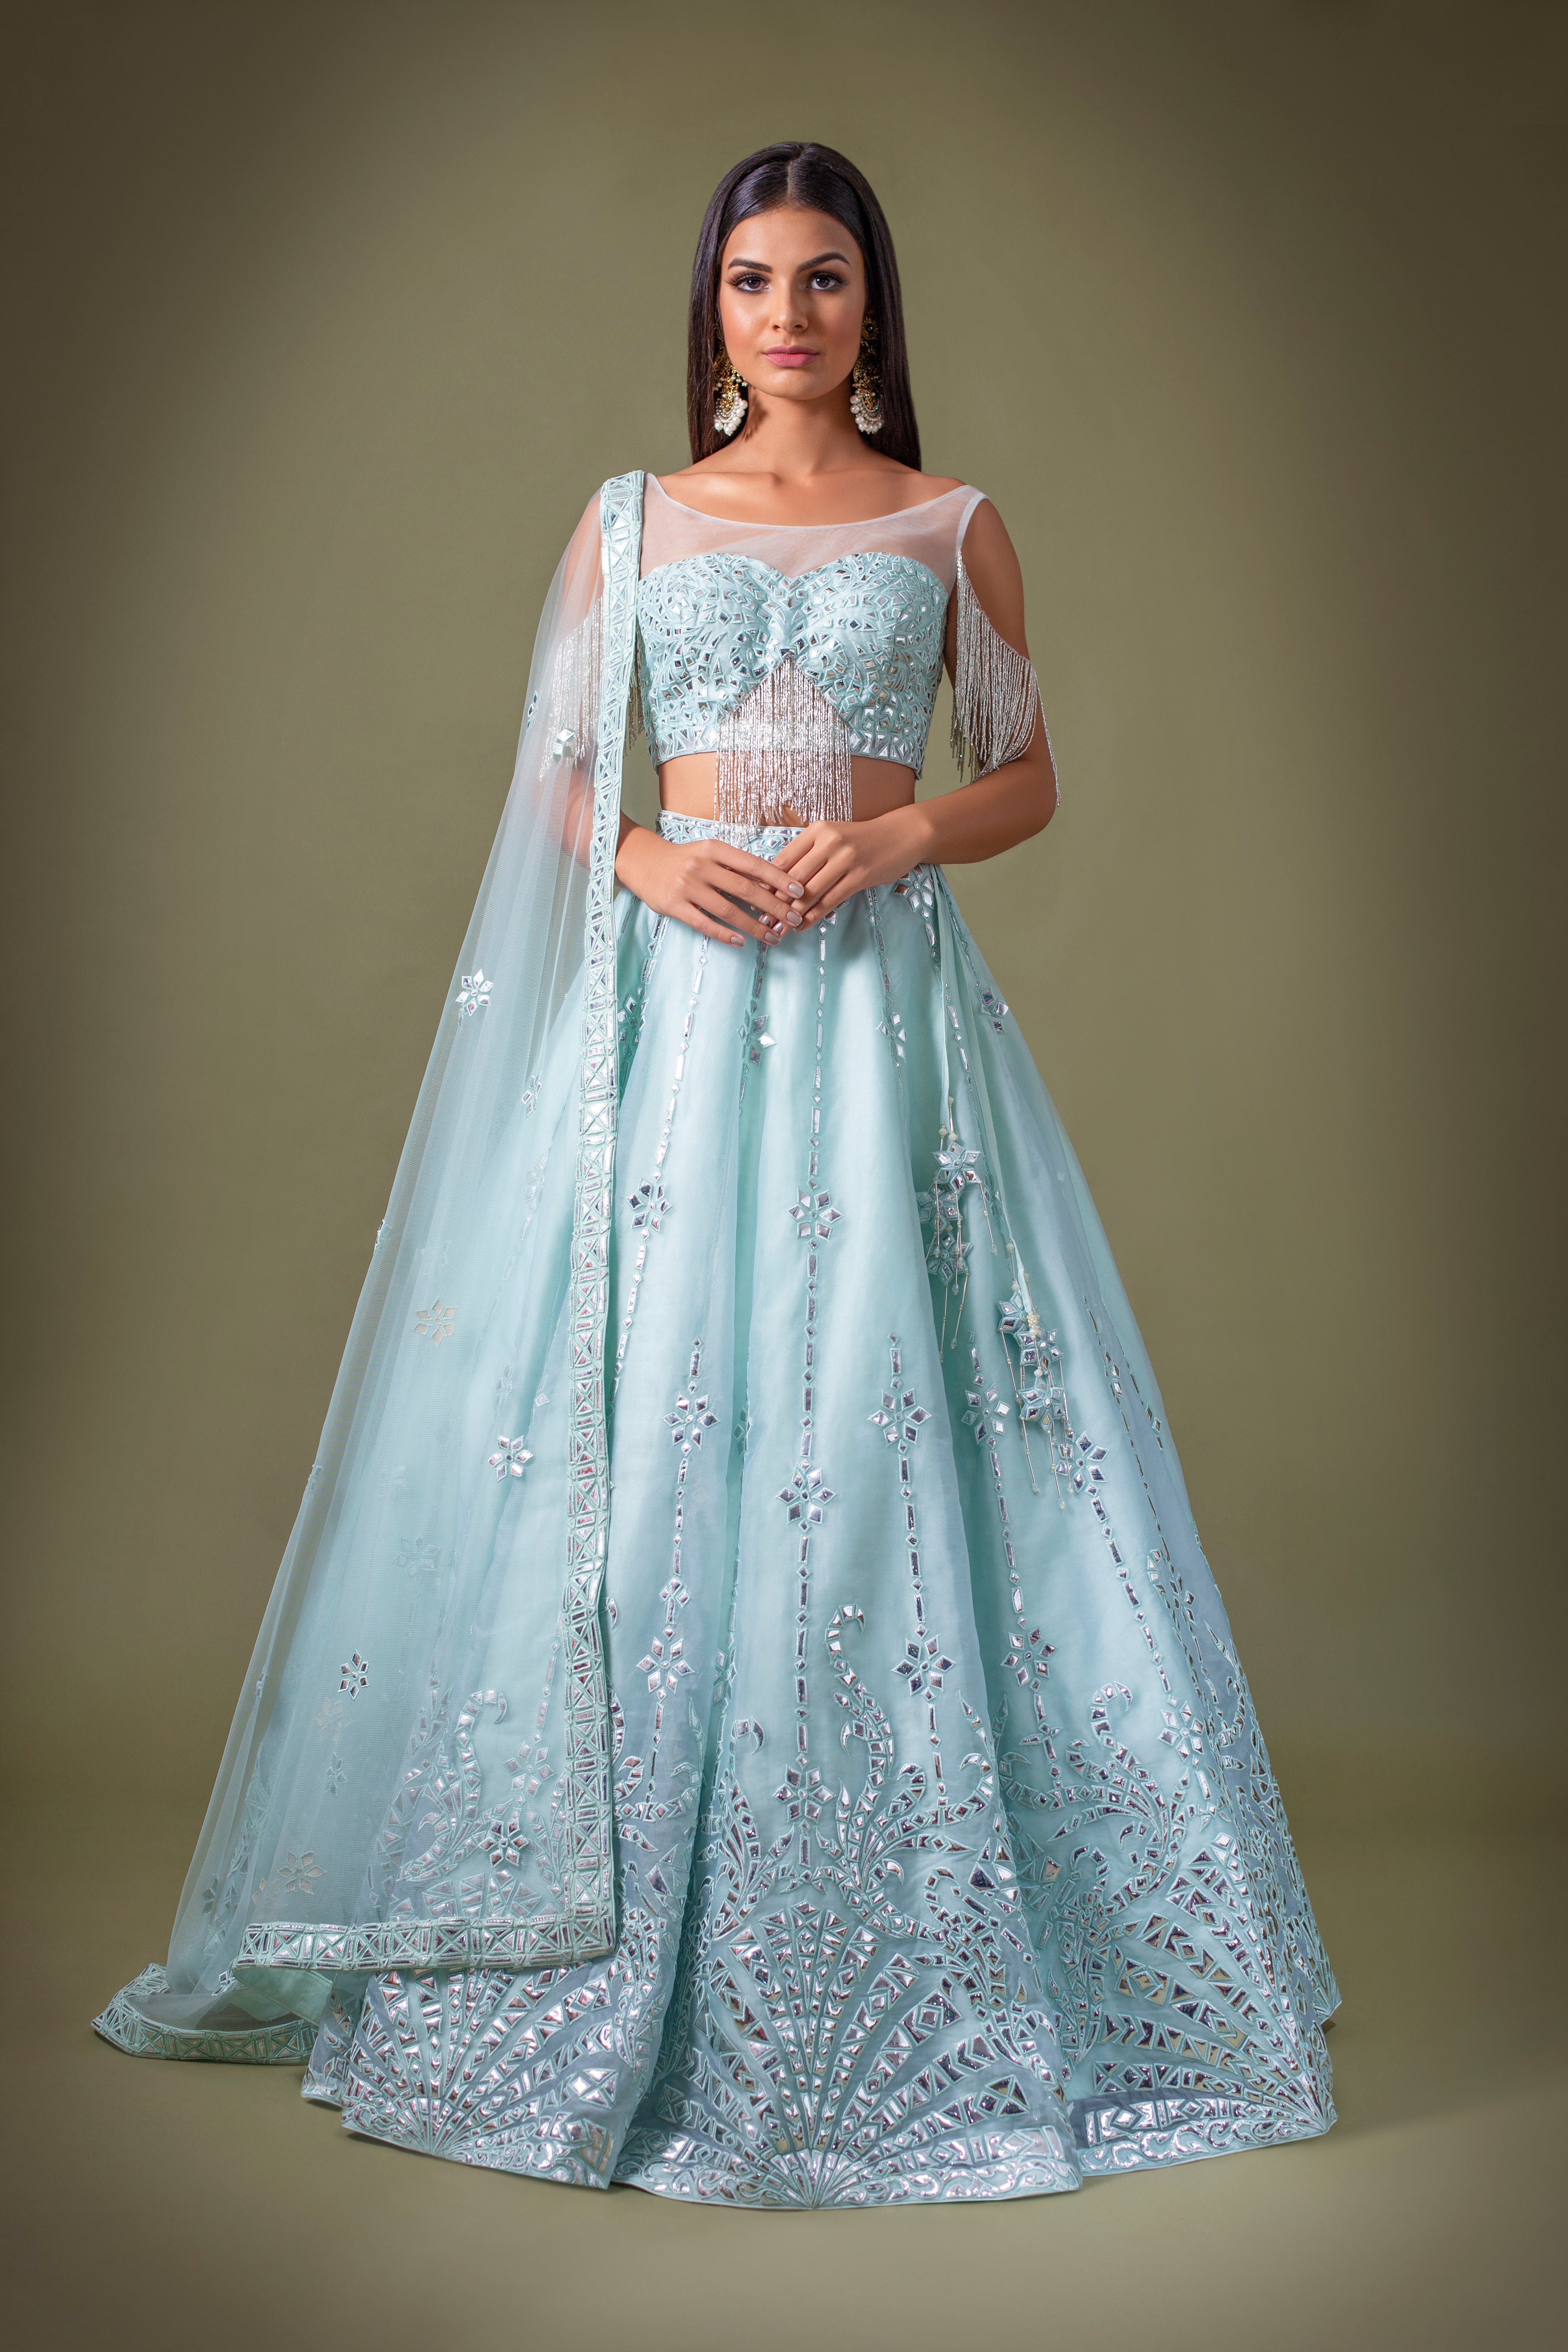 Aqua Blue Embroidery Designer Indian Wedding Gown In USA, UK, Canada